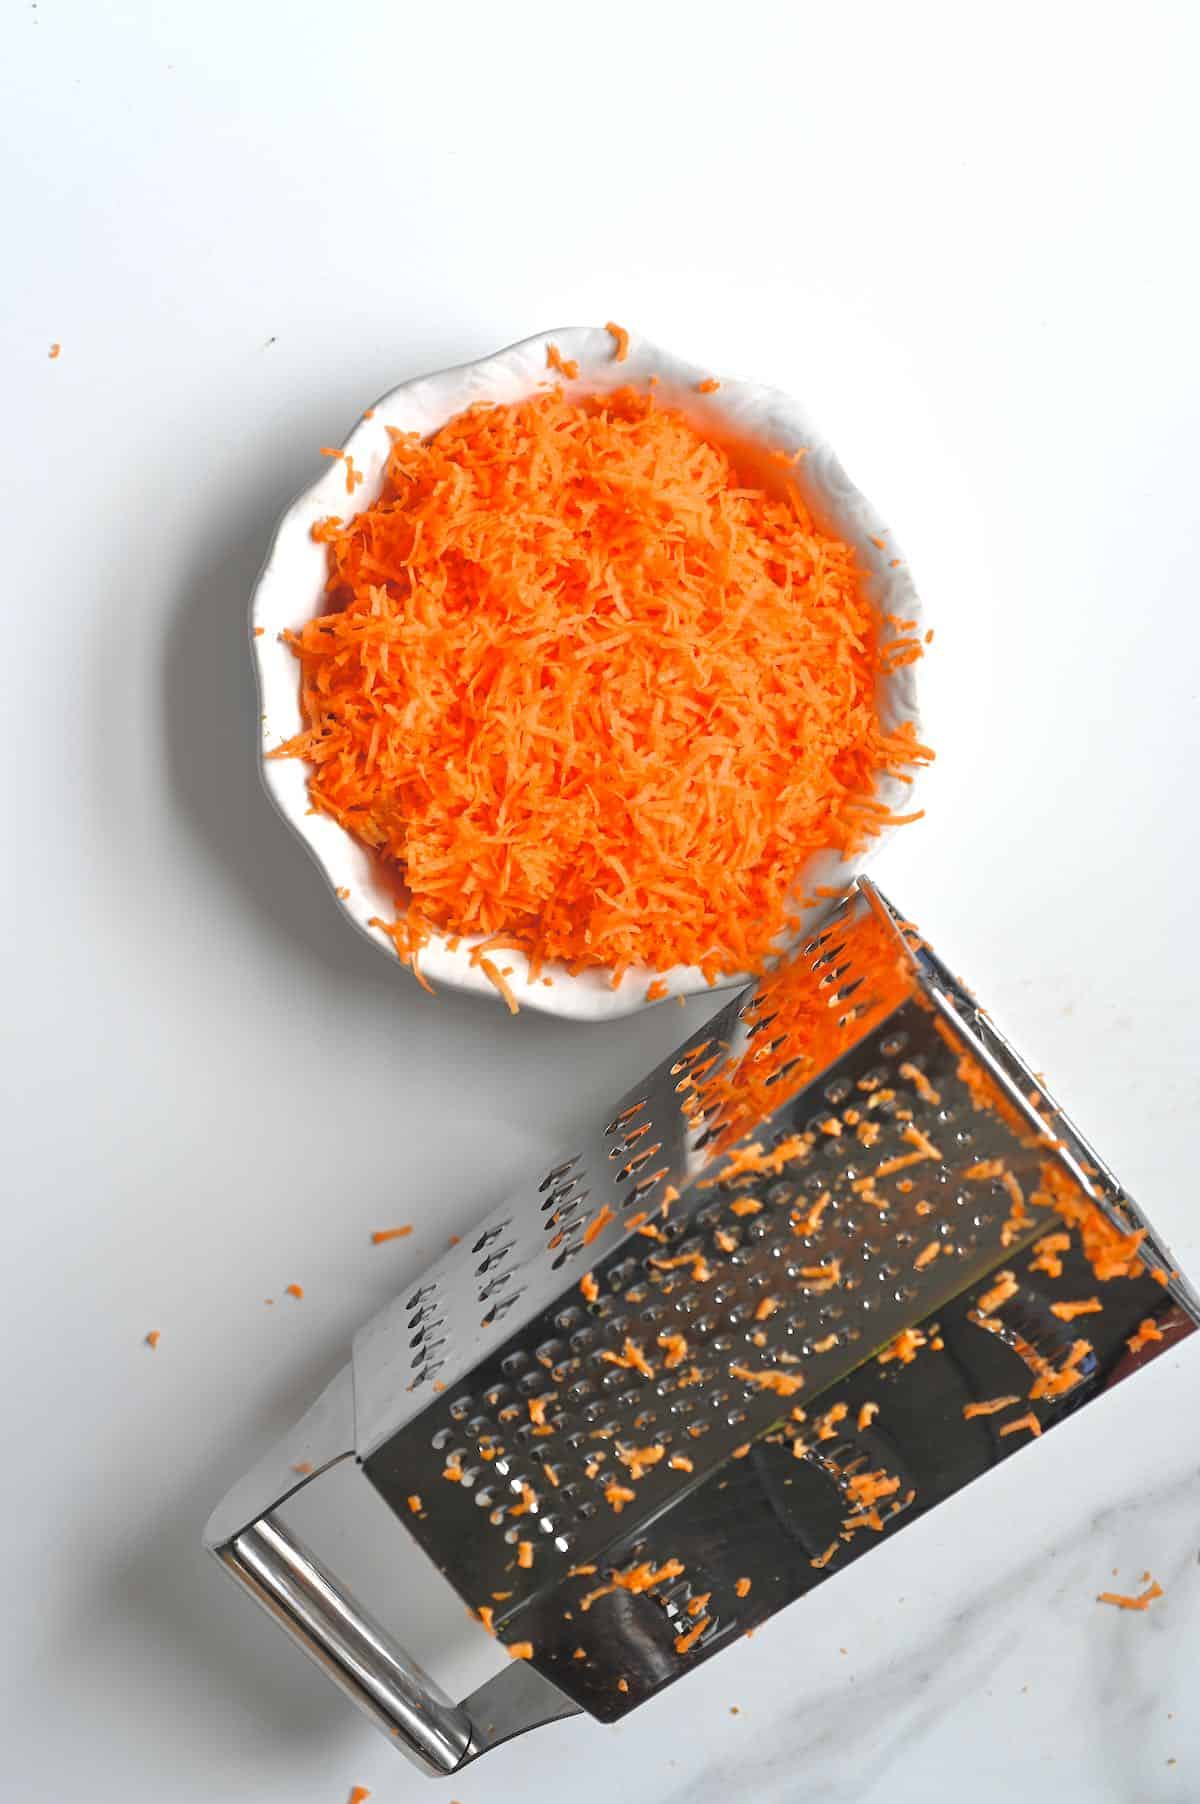 Crated carrots in a small dish and a grater next to it